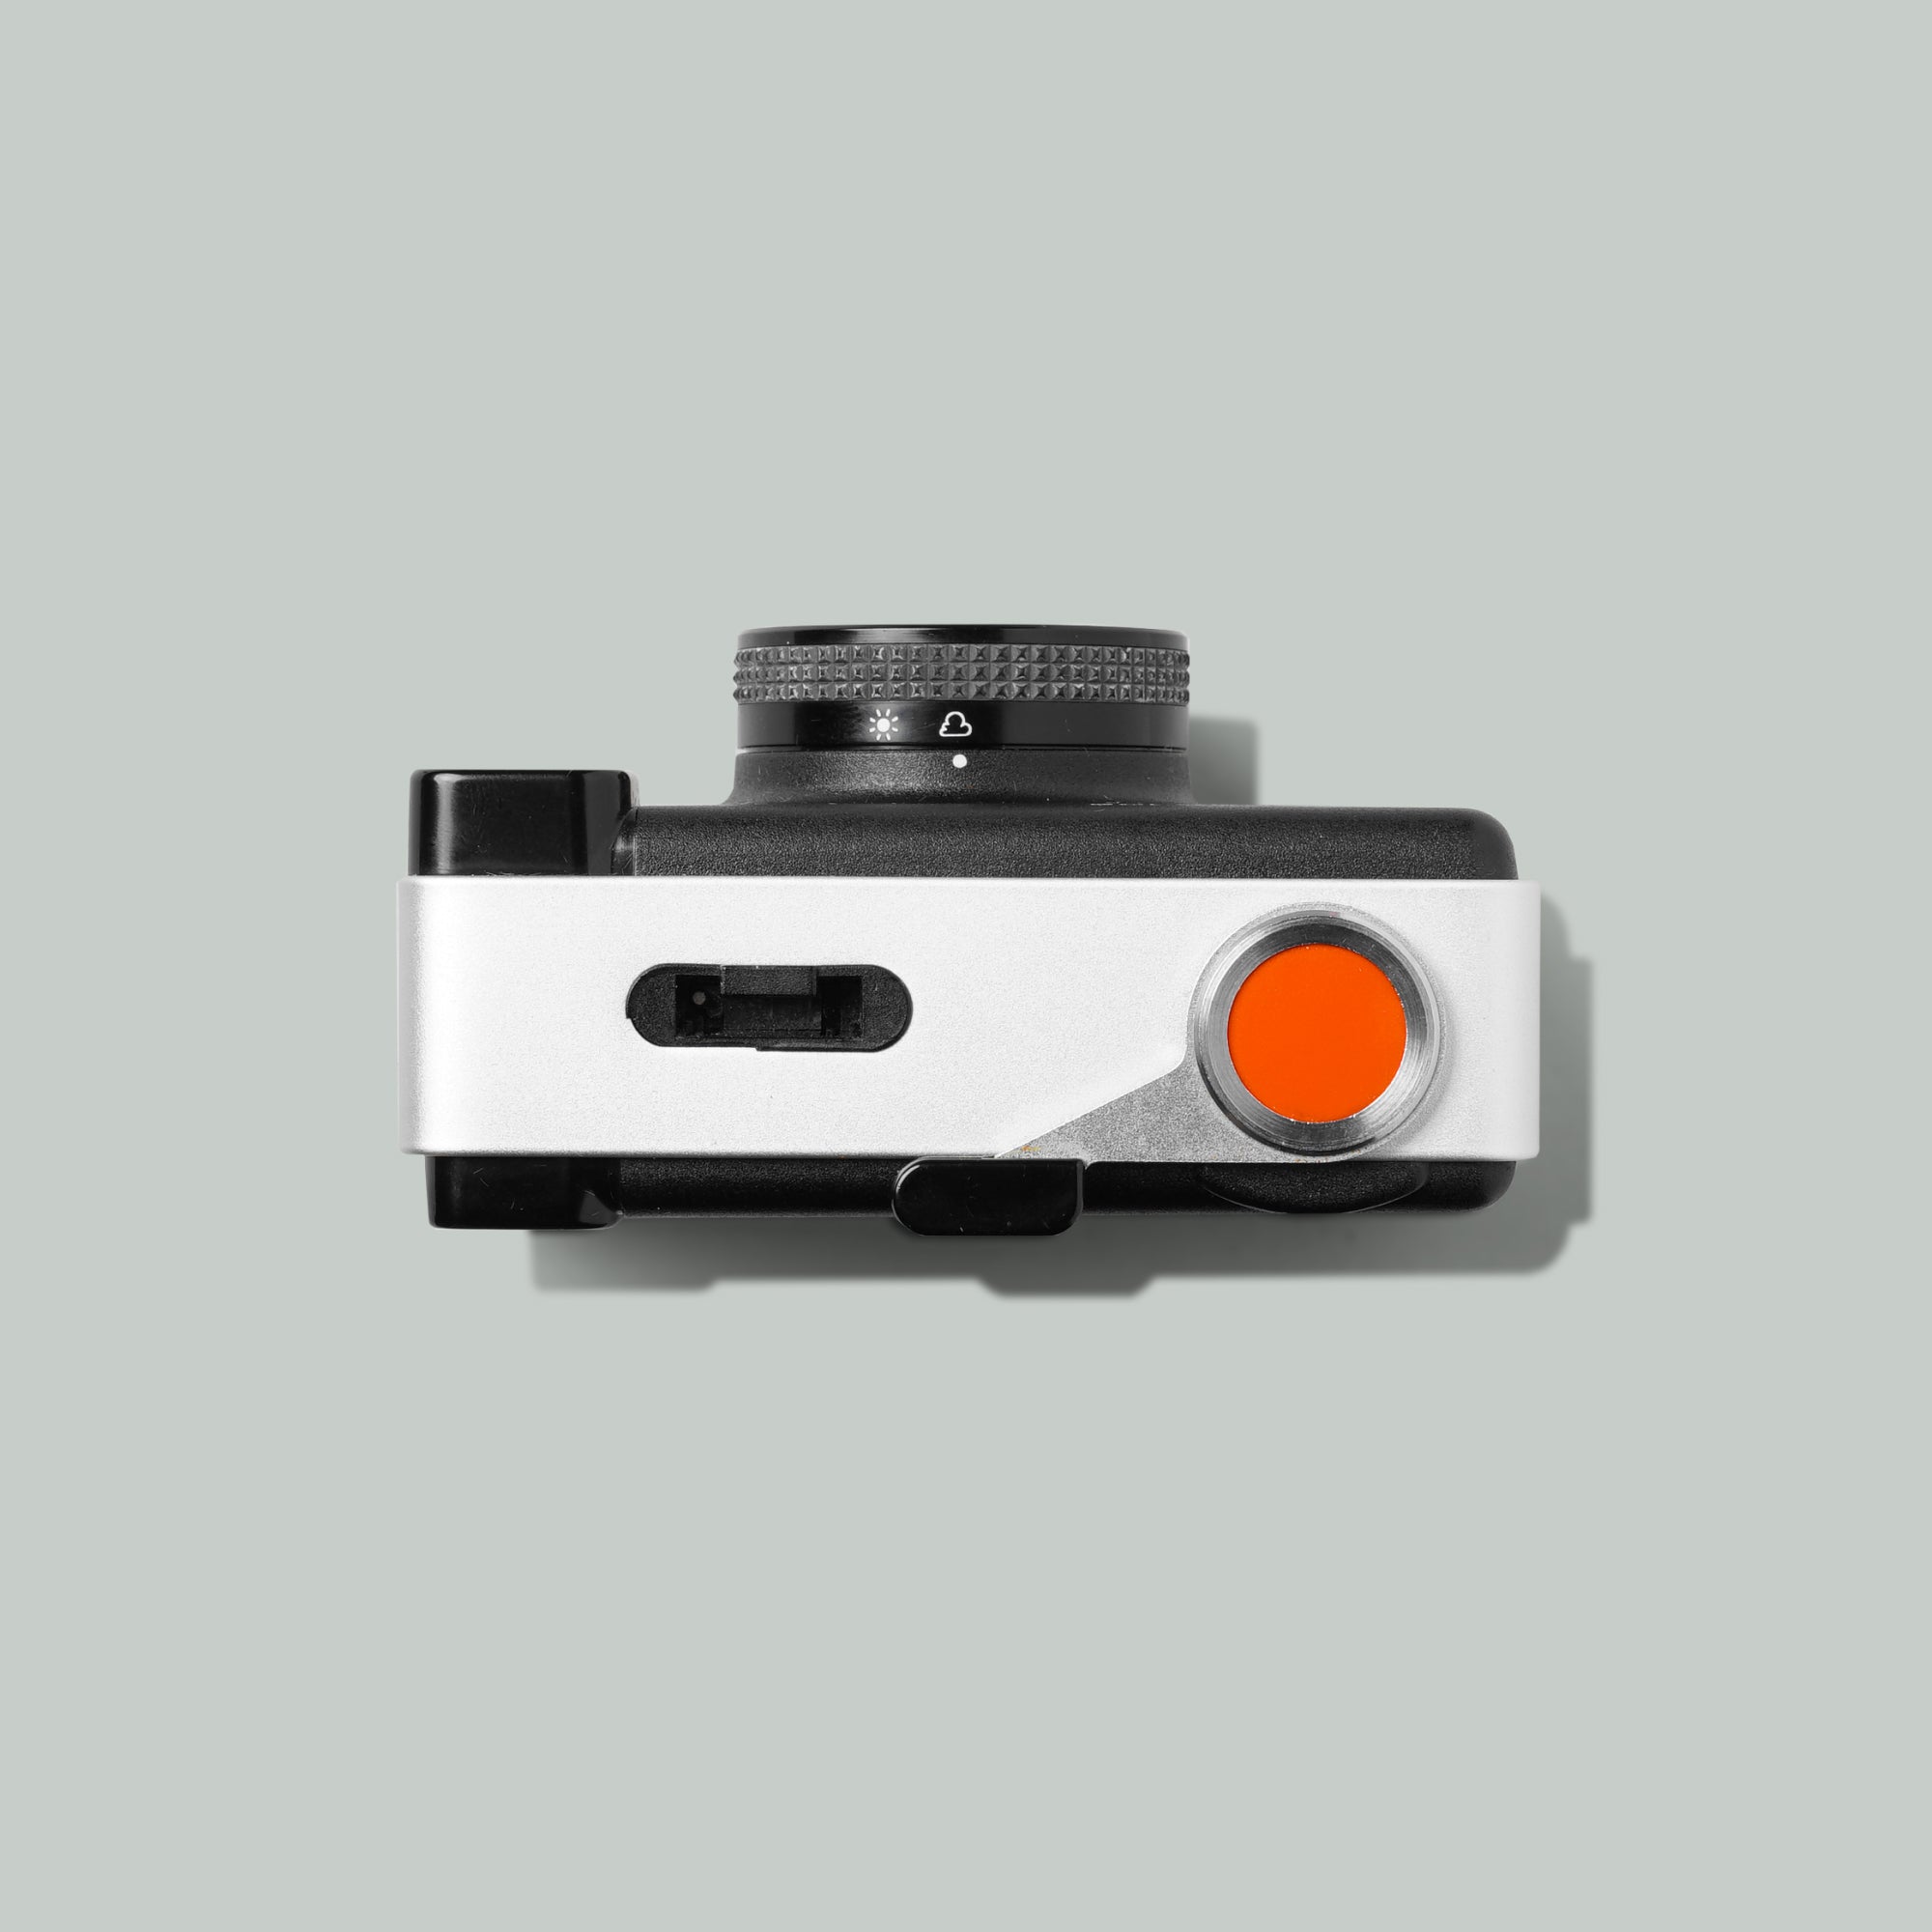 Buy AGFA Agfamatic 108 now at Analogue Amsterdam